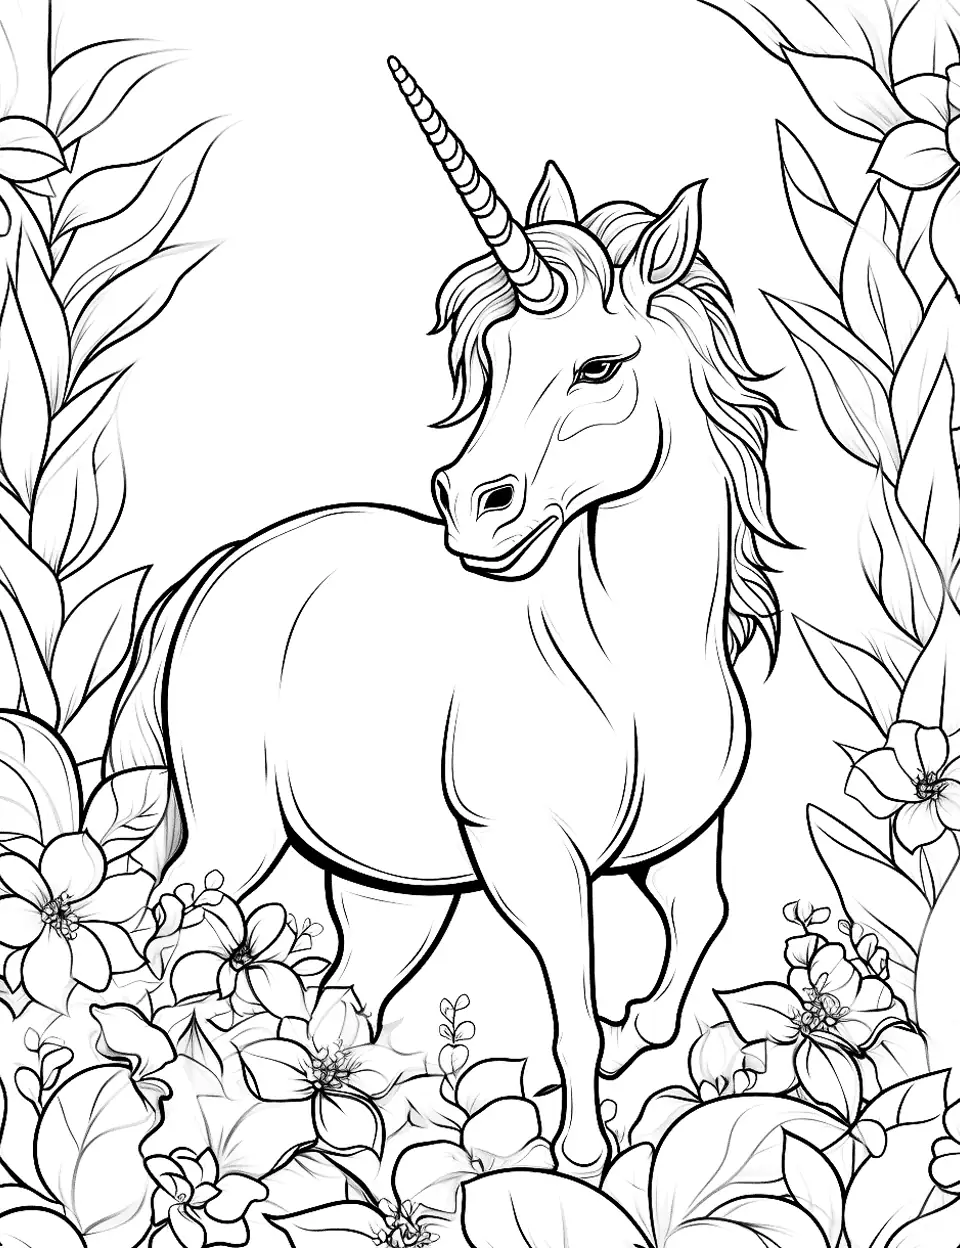 Jungle Unicorn Coloring Page - A unicorn exploring a dense jungle, filled with exotic plants.